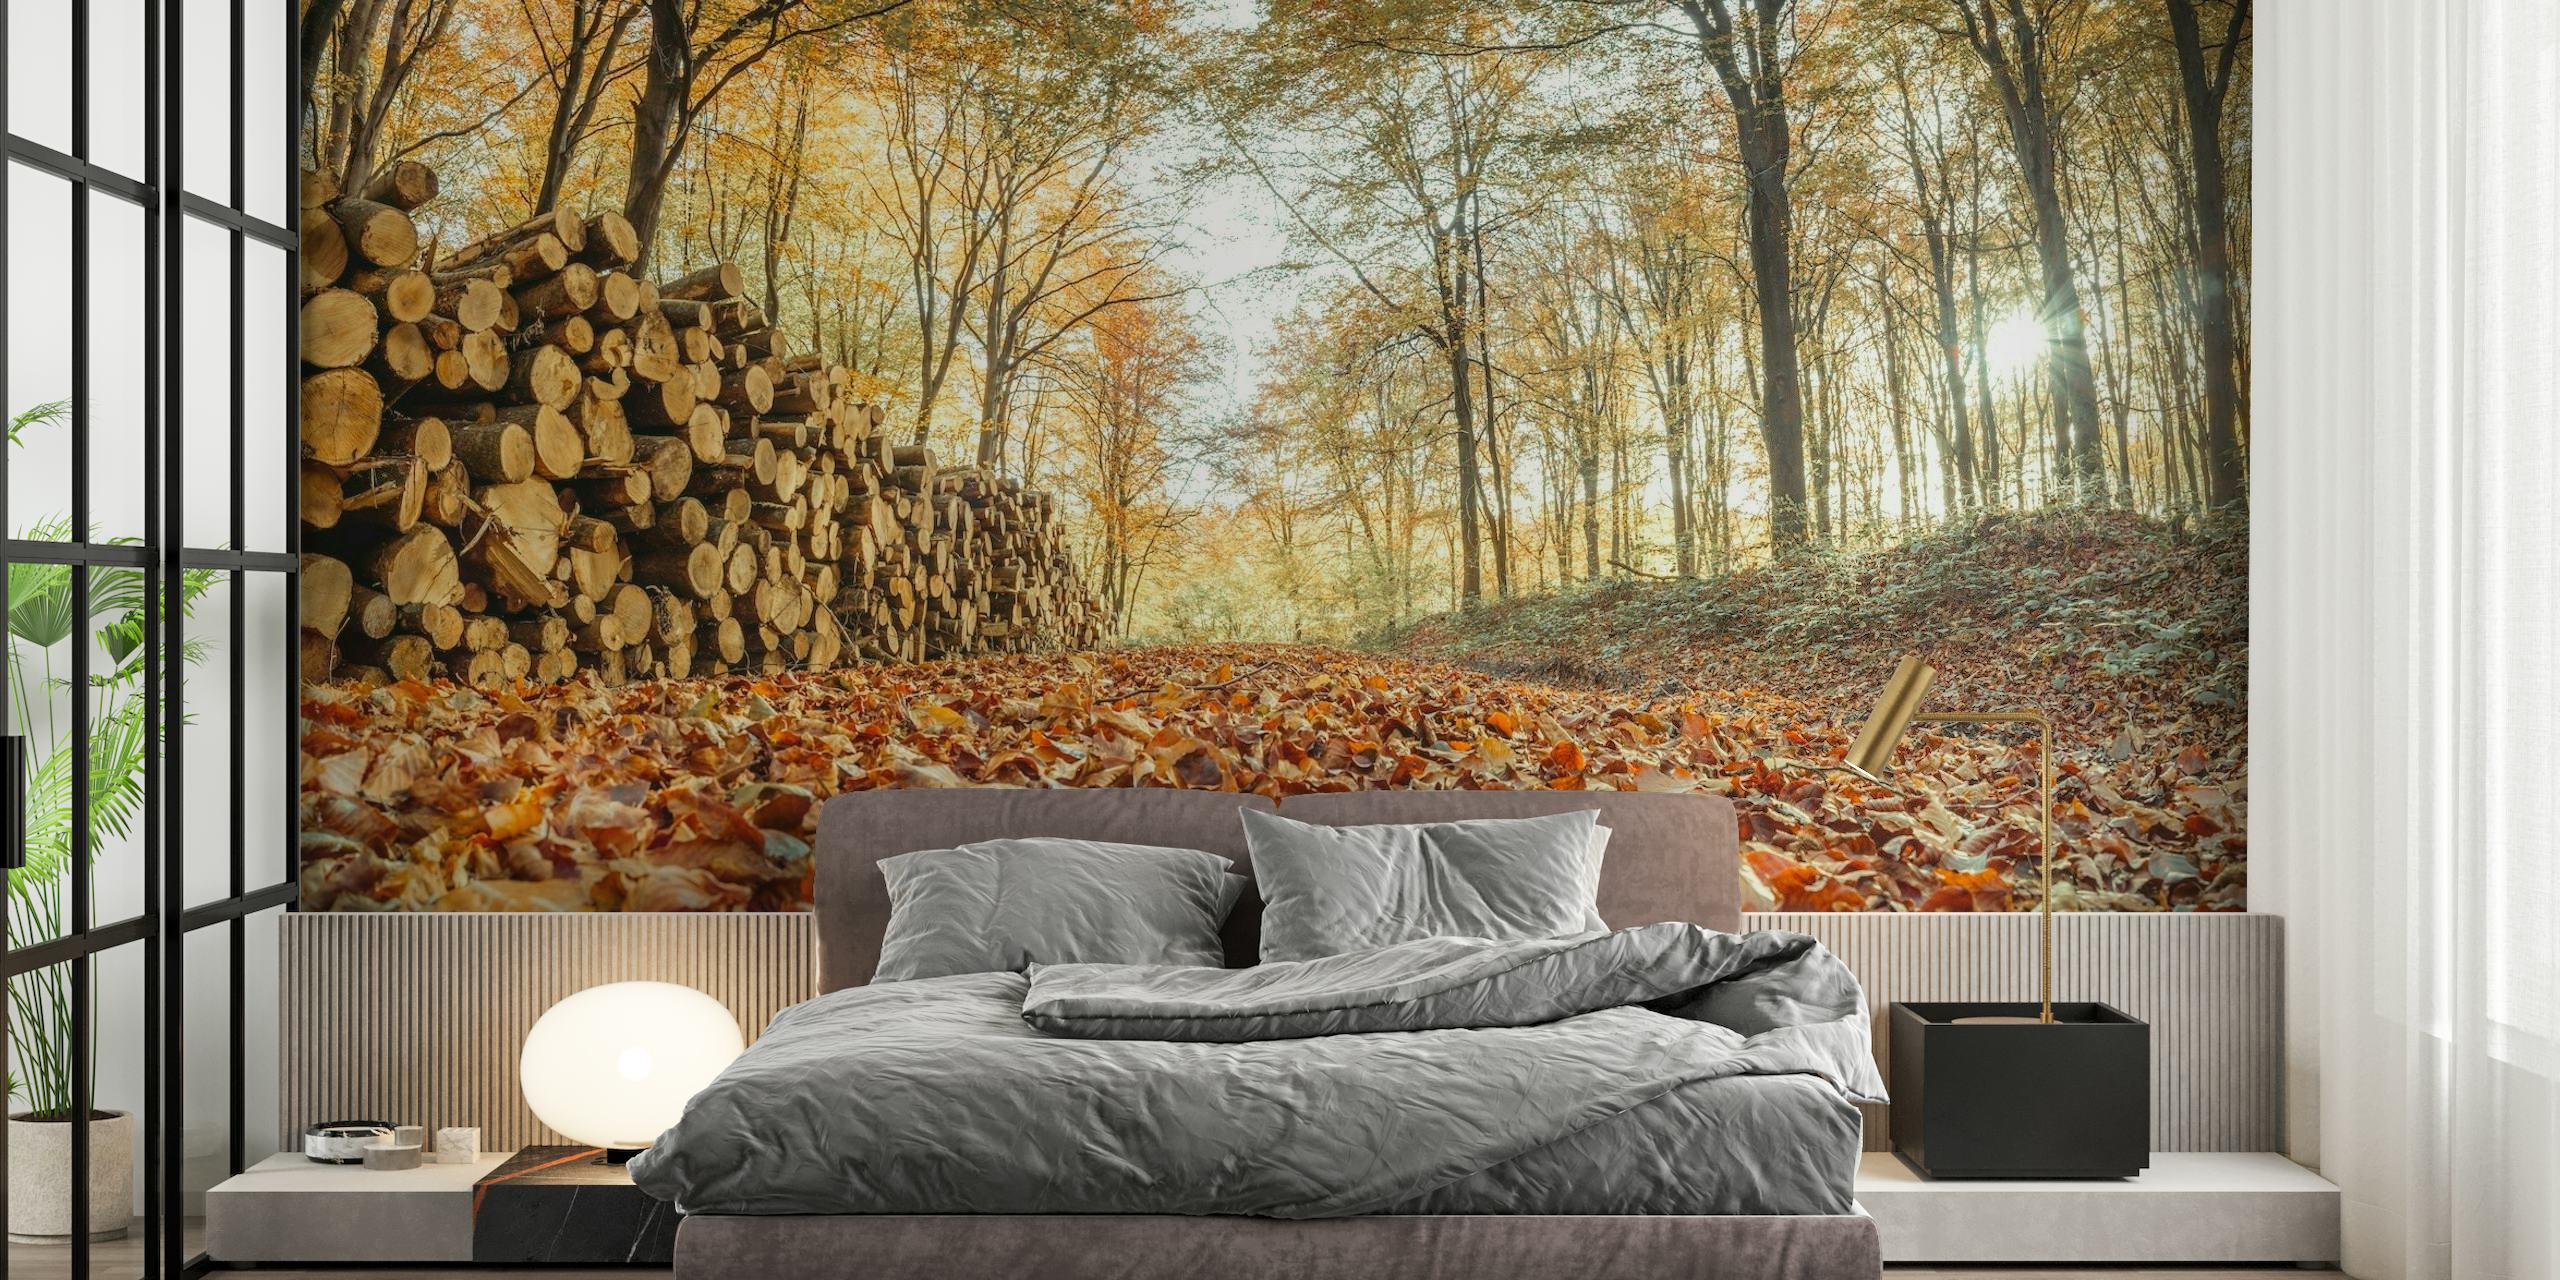 Logs in Autumn Forest wallpaper